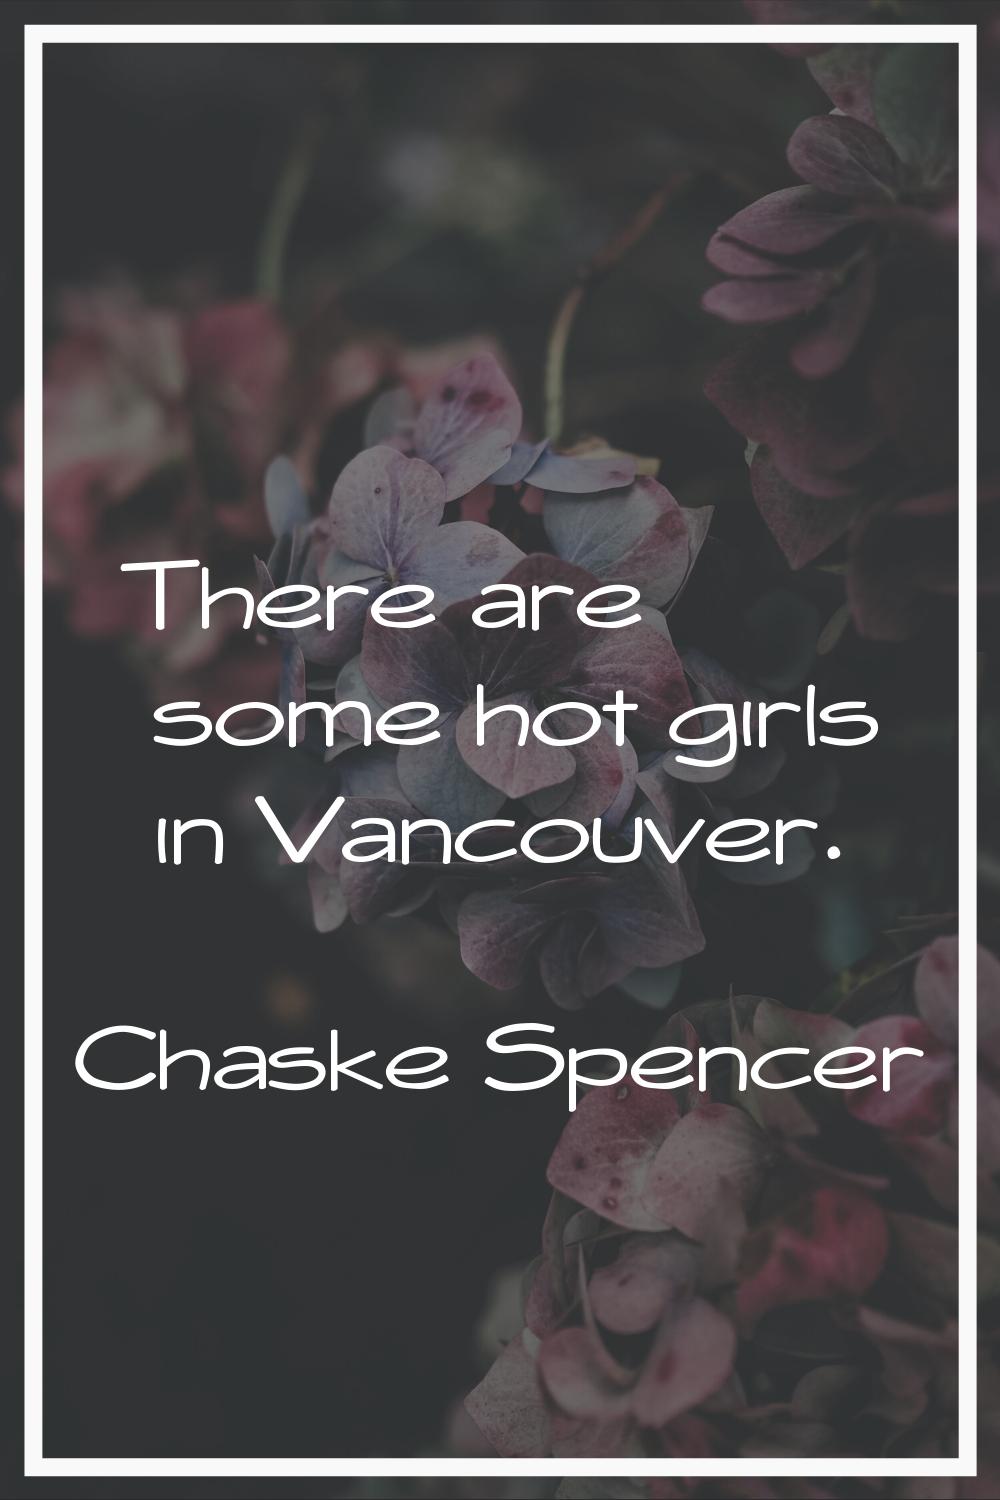 There are some hot girls in Vancouver.